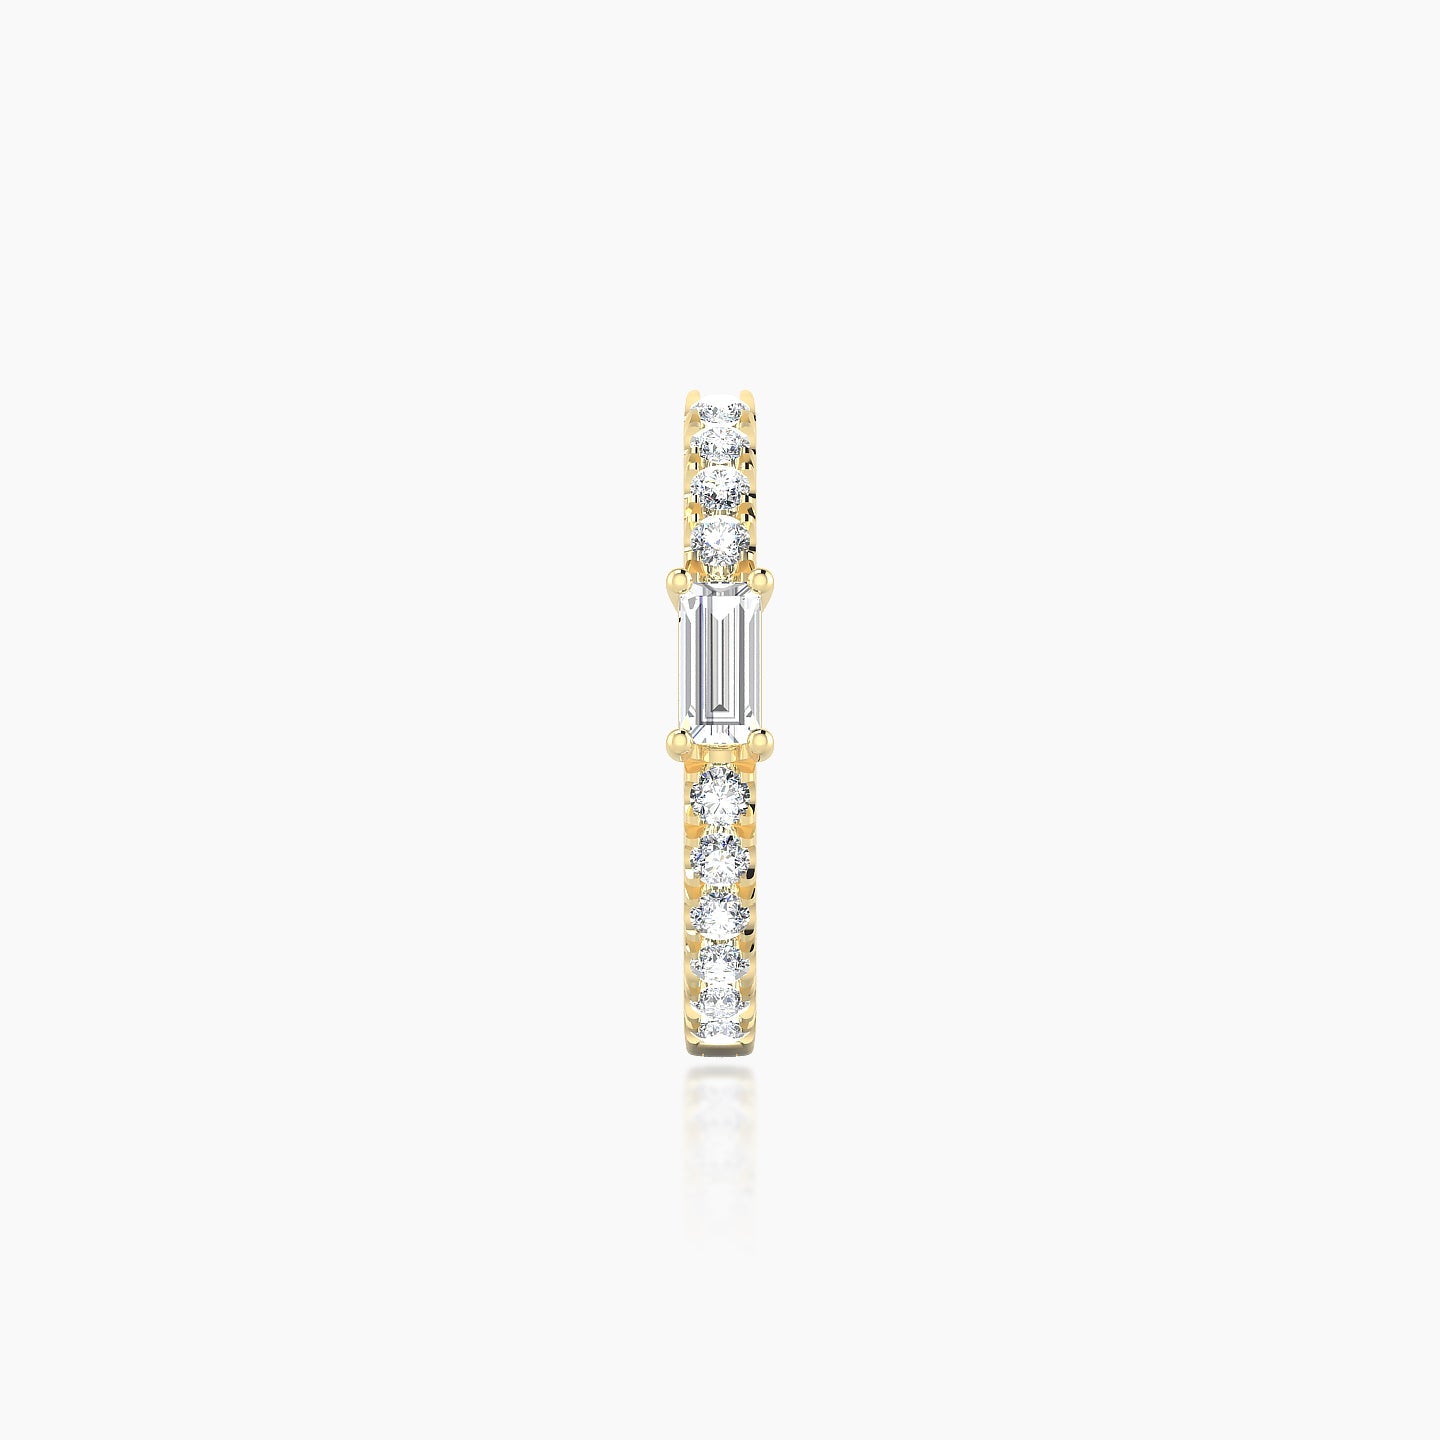 Inanna | 18k Yellow Gold 9.5 mm Baguette Diamond Nose Ring Piercing